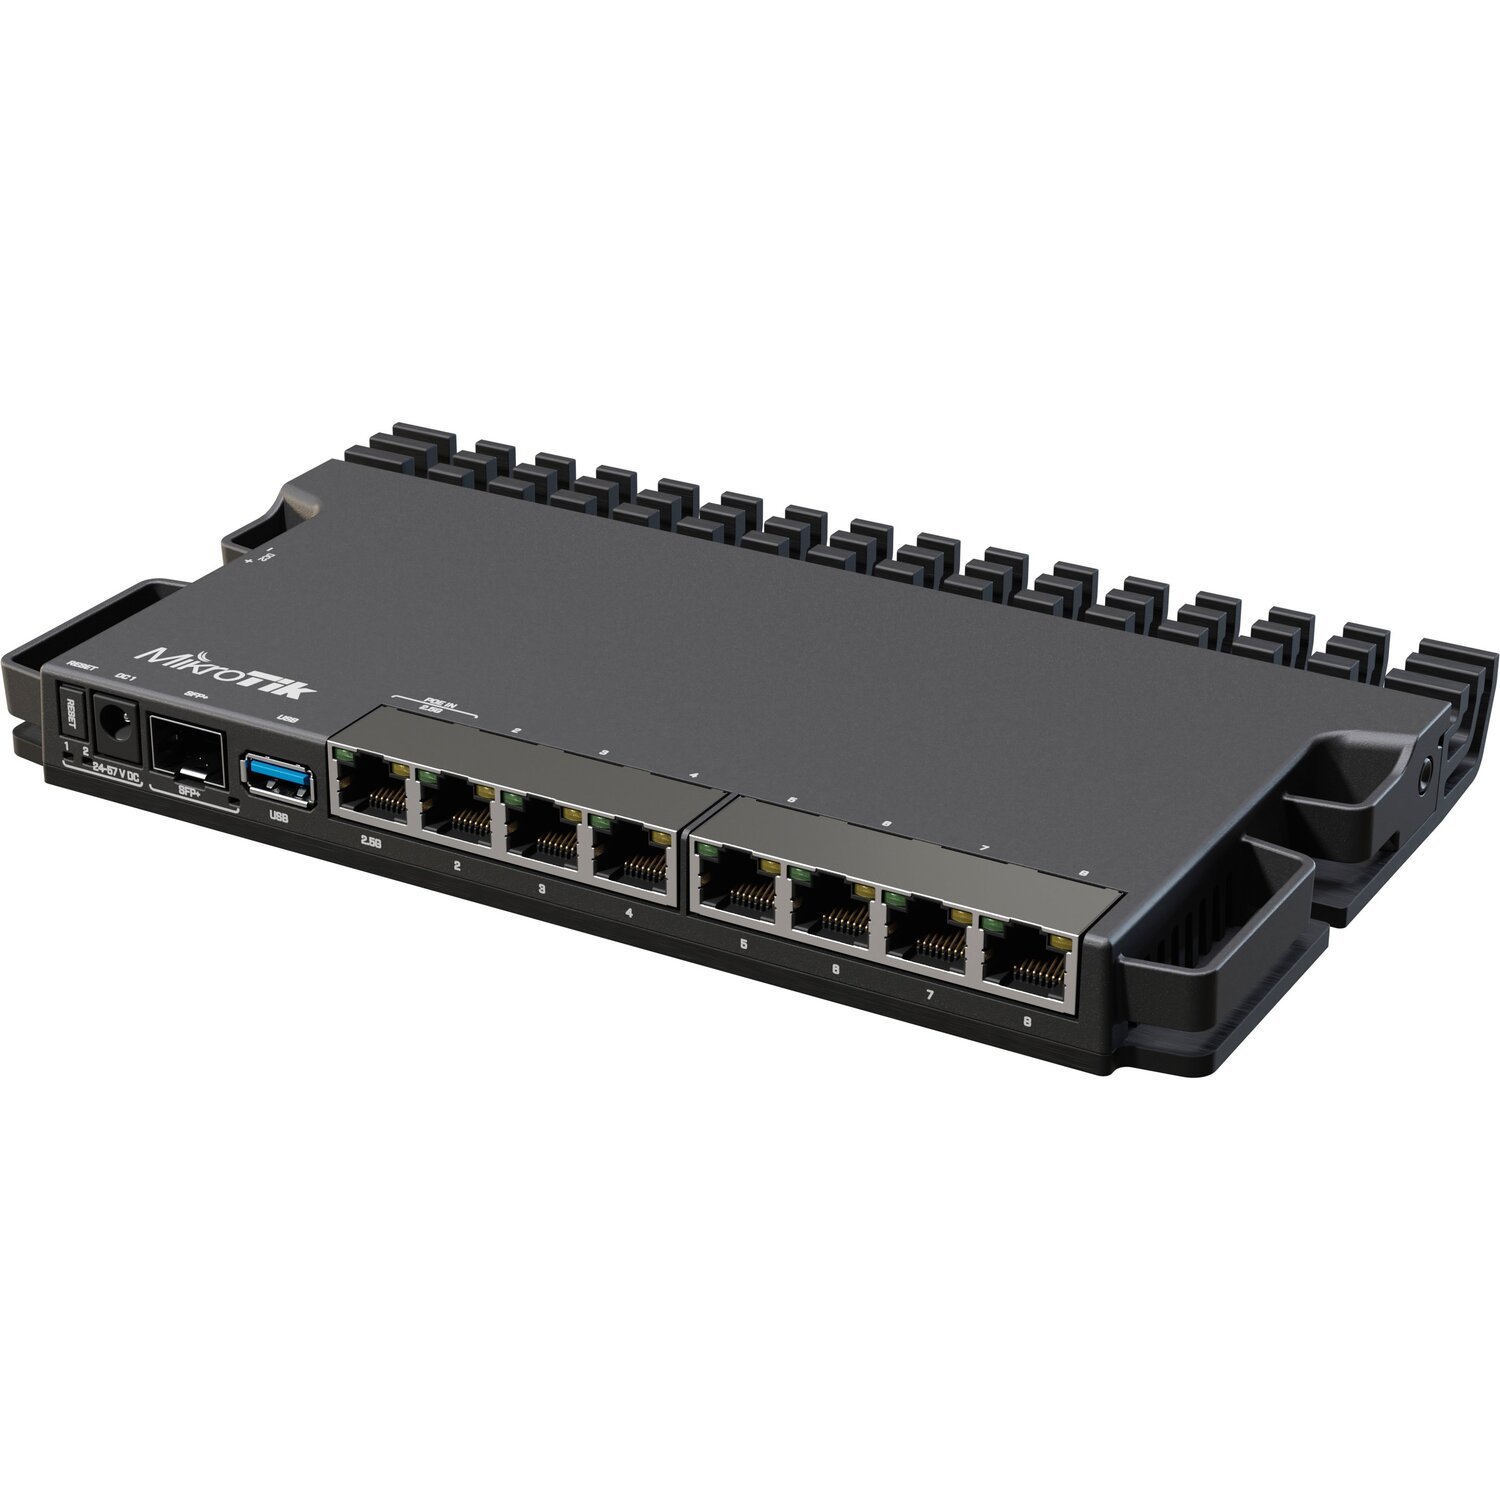 Маршрутизатор MikroTik RouterBOARD RB5009UG+S+IN (RB5009UG+S+IN) фото 